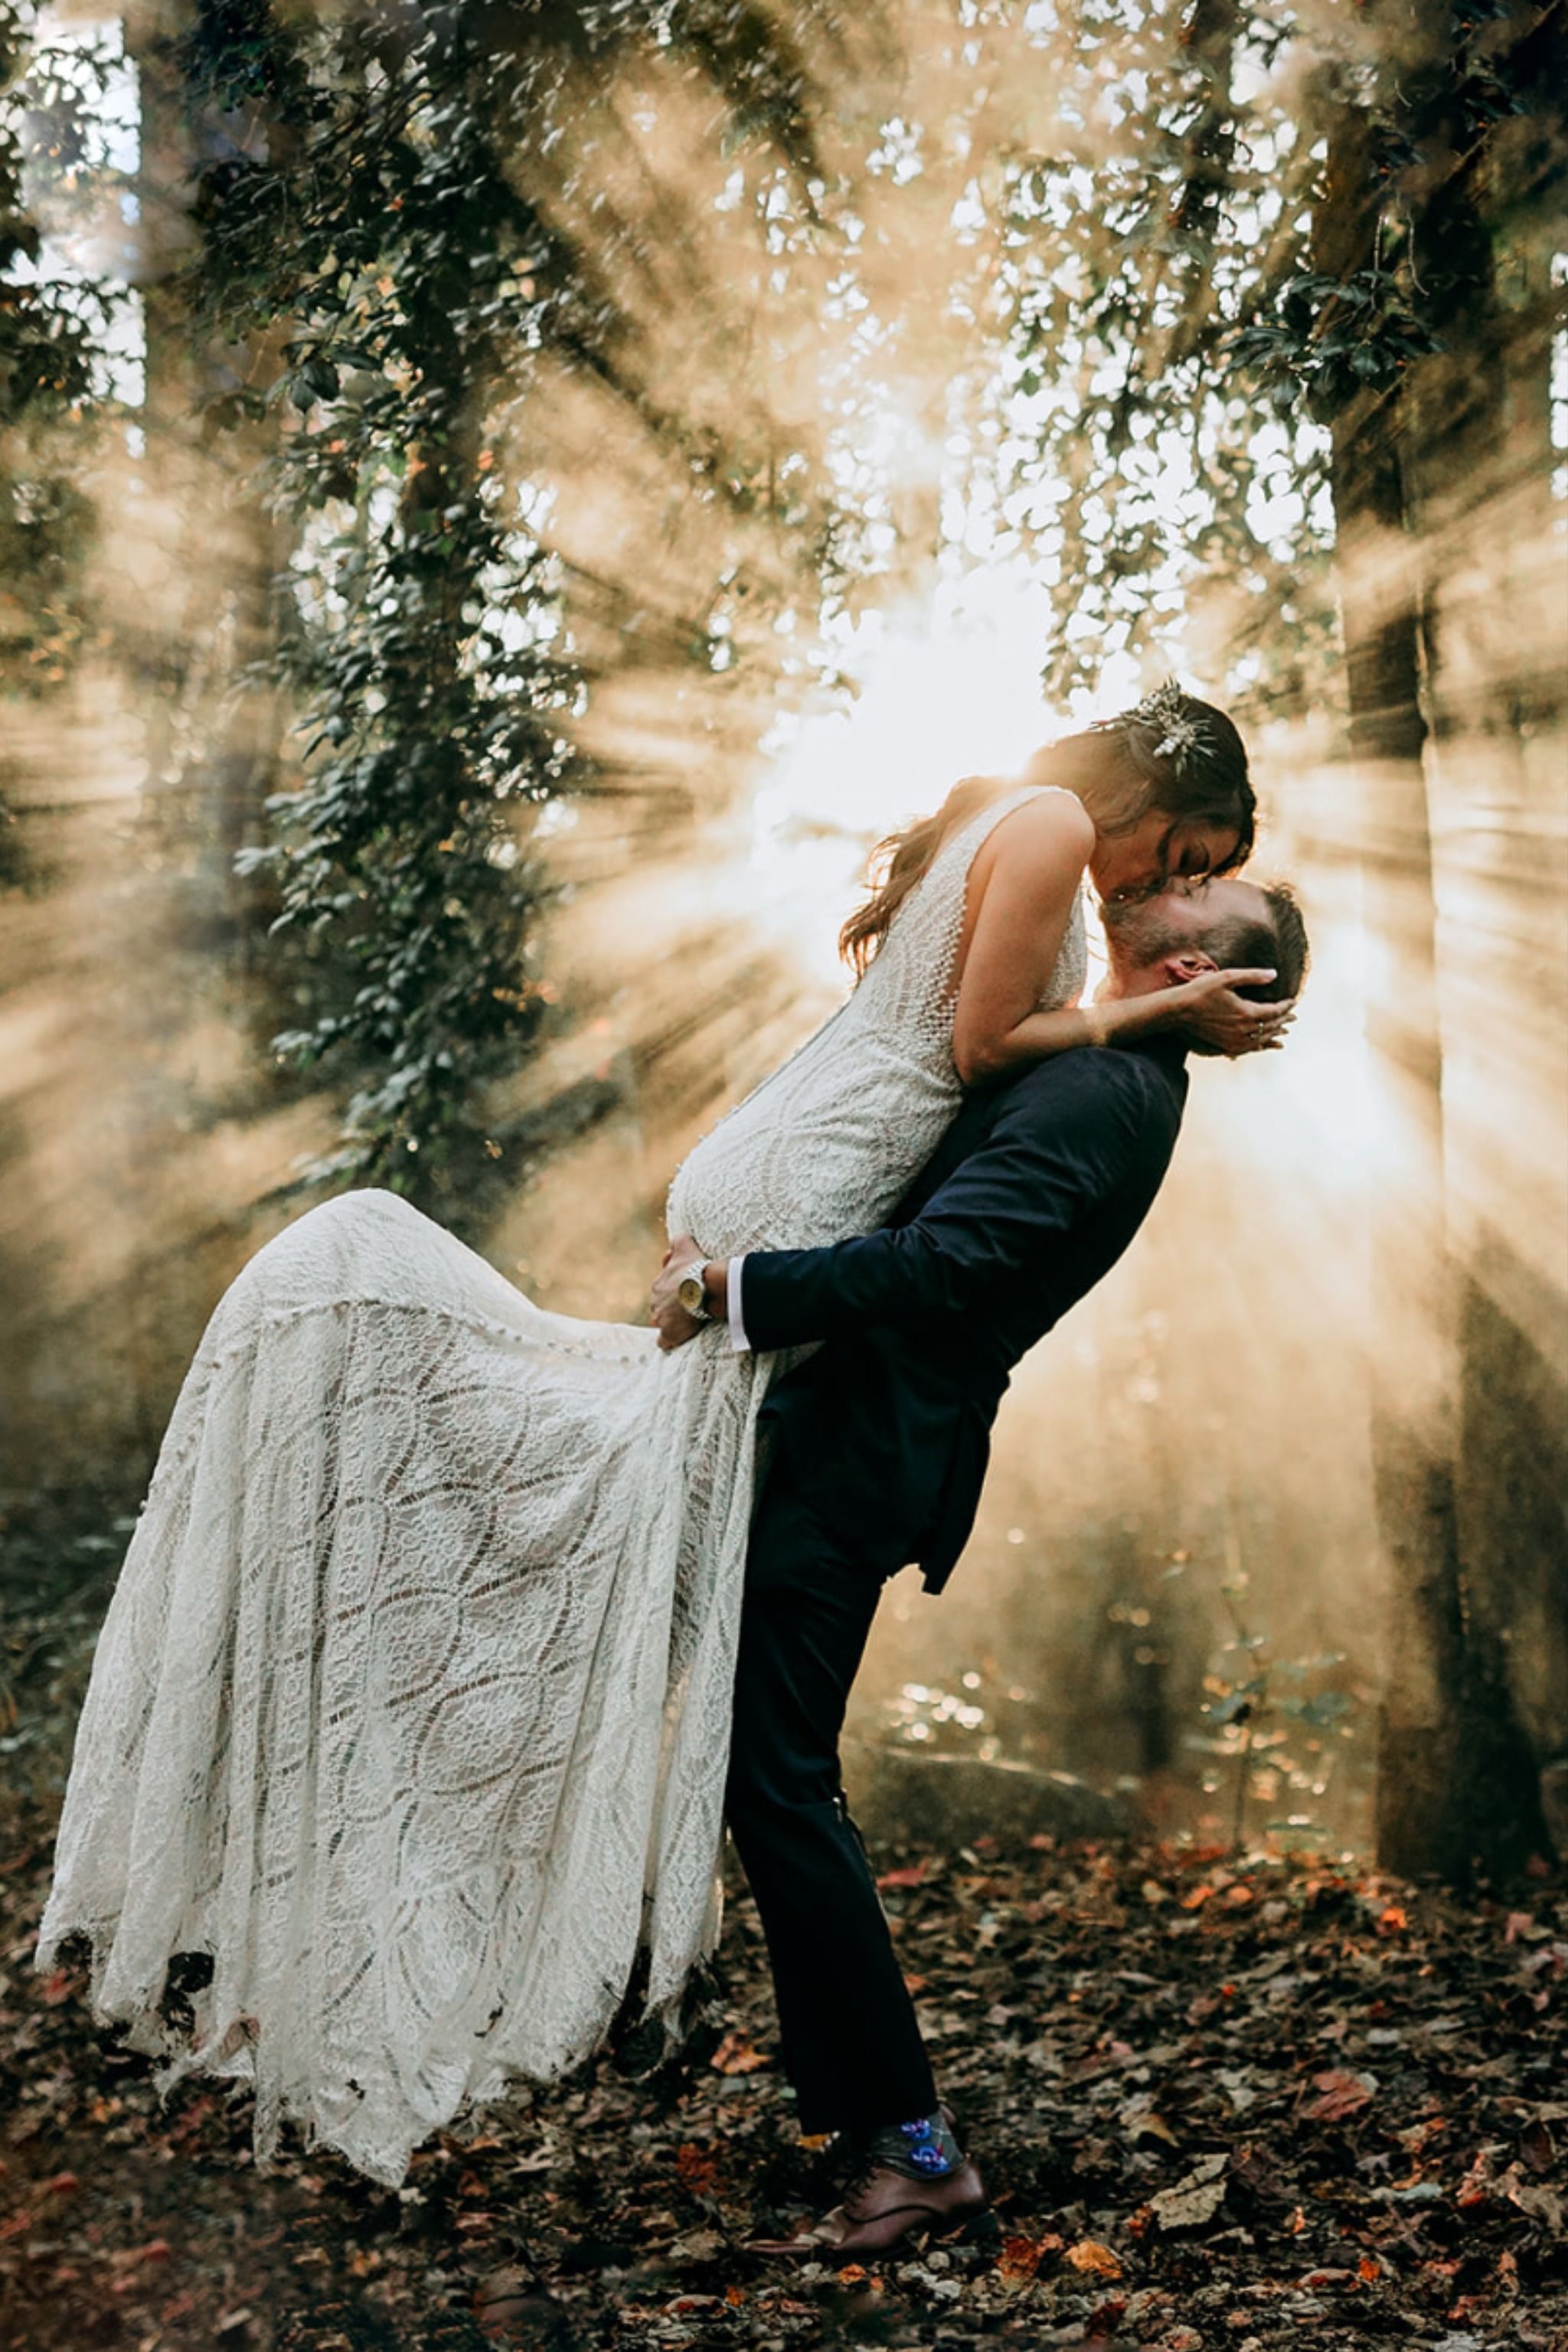 The 186 Most Kickass Wedding Images Ever!